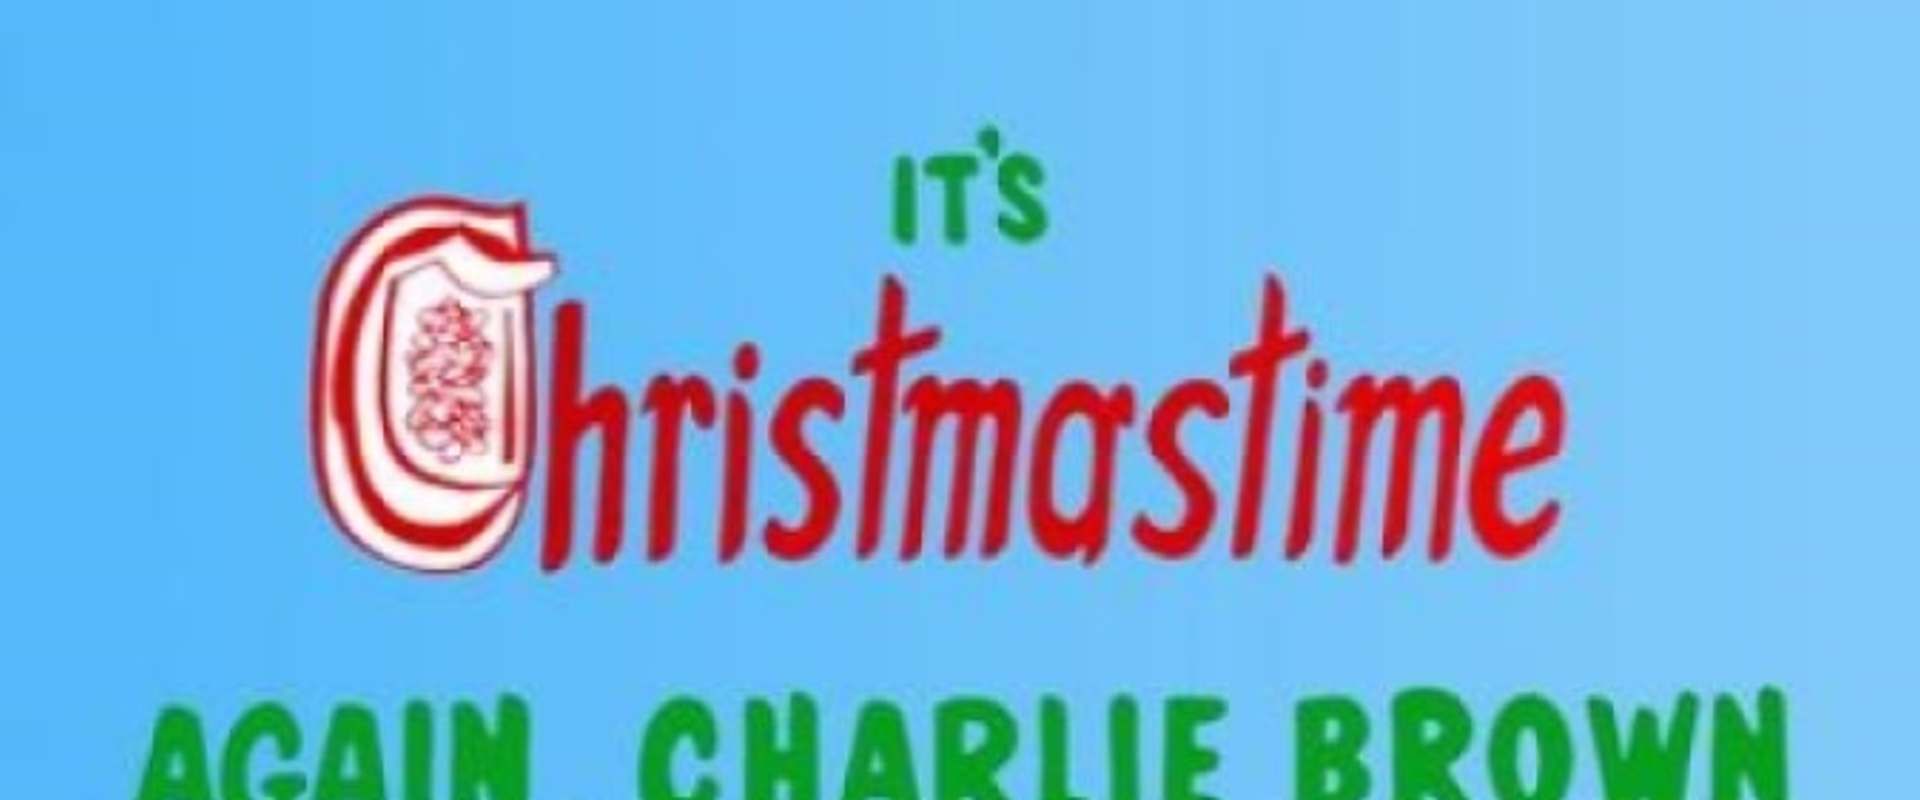 It's Christmastime Again, Charlie Brown background 2